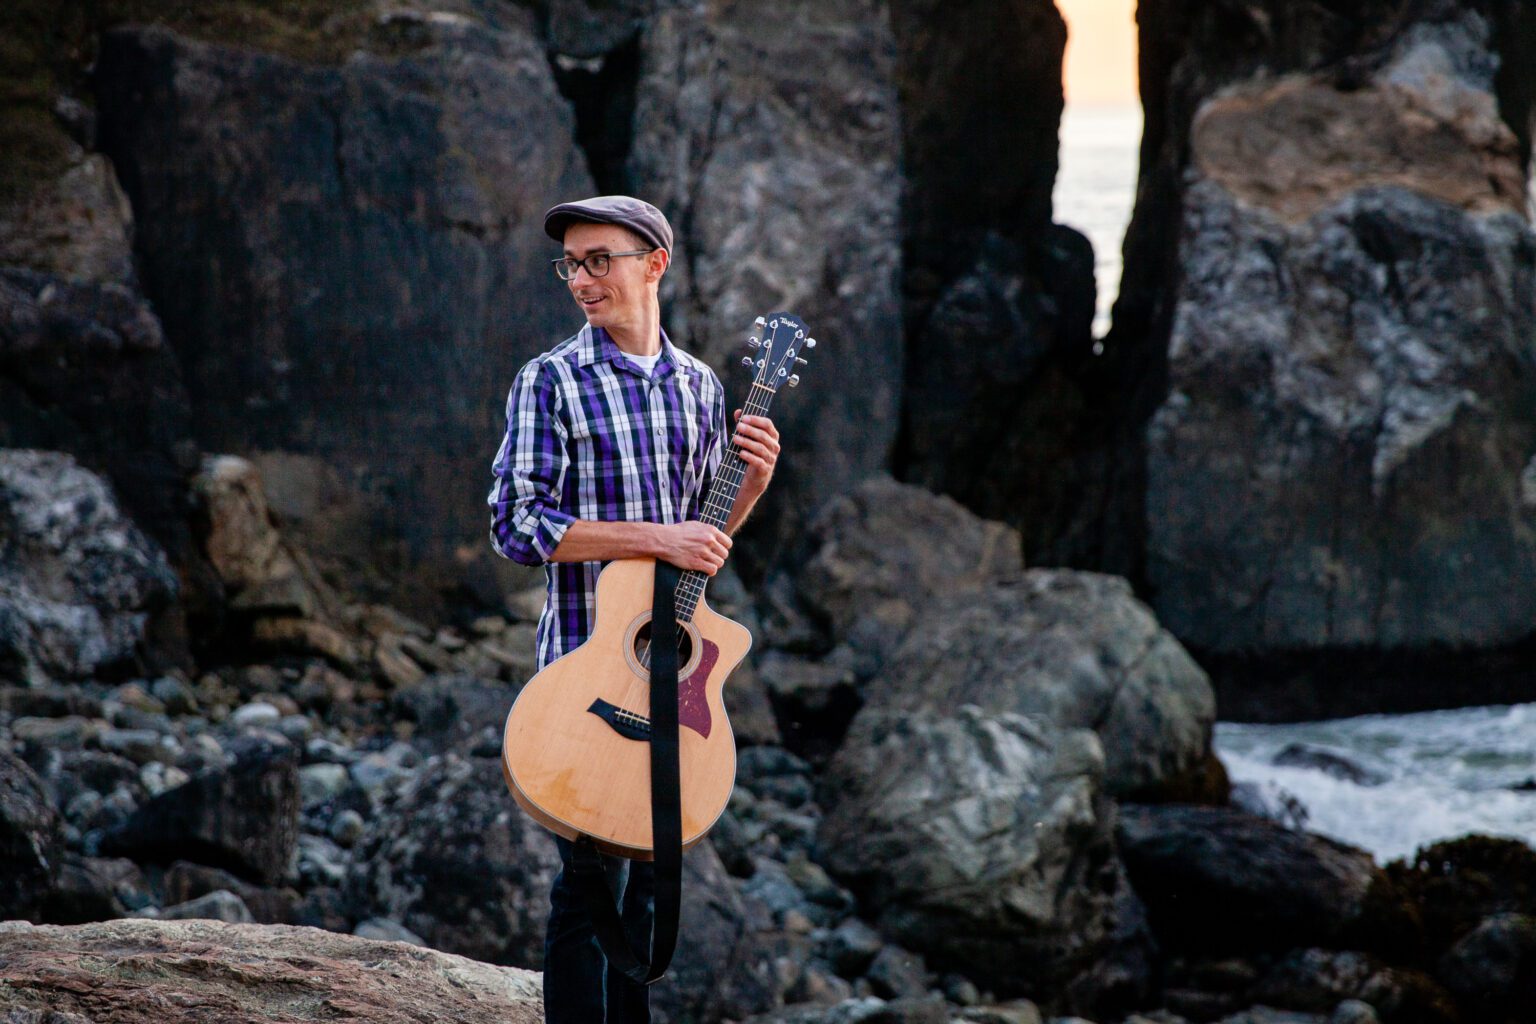 Area musician Michael Dayvid holds an acoustic guitar near the waters on the rocks.